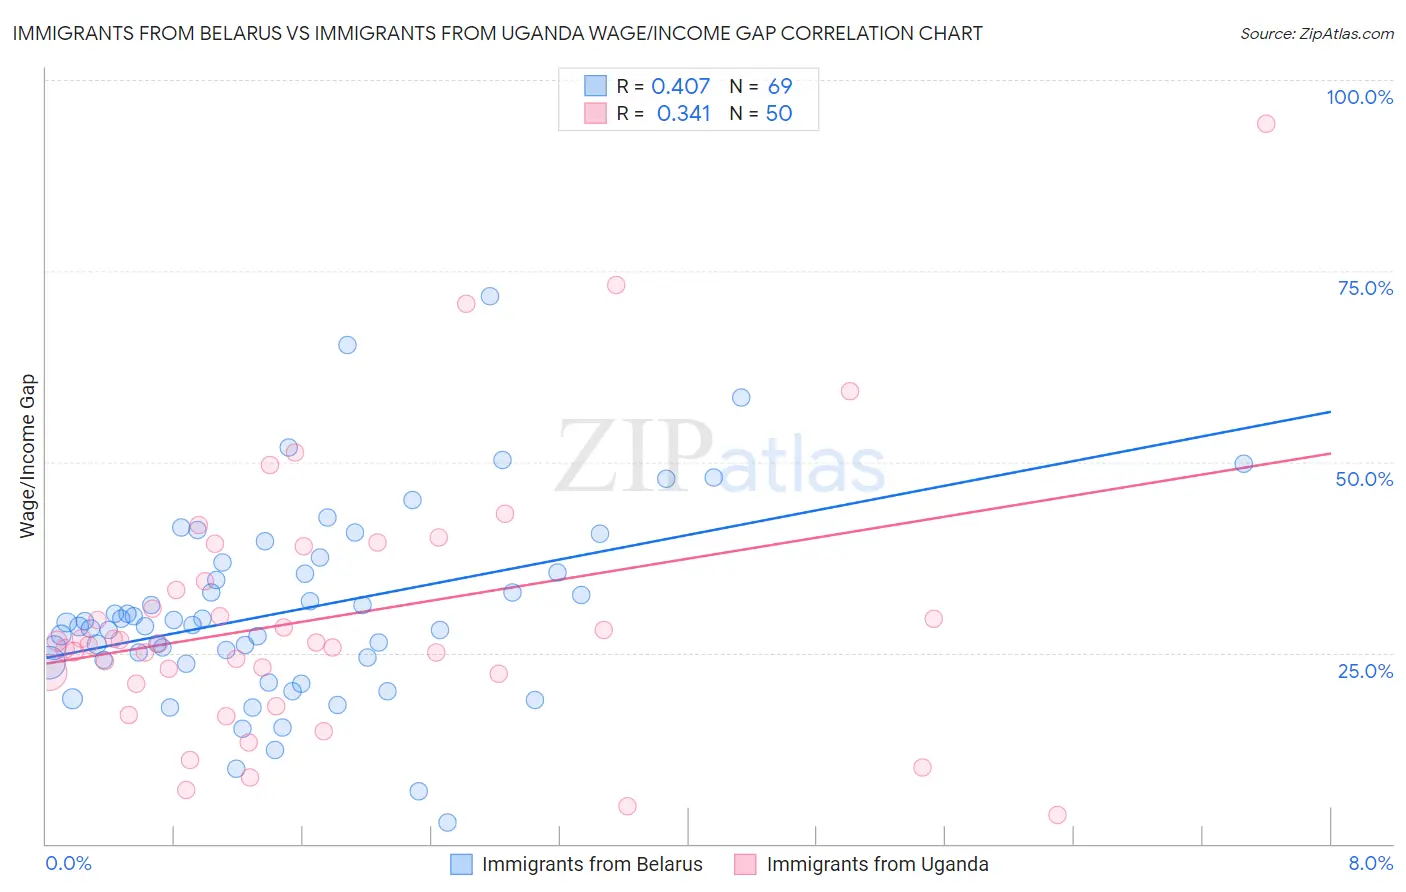 Immigrants from Belarus vs Immigrants from Uganda Wage/Income Gap